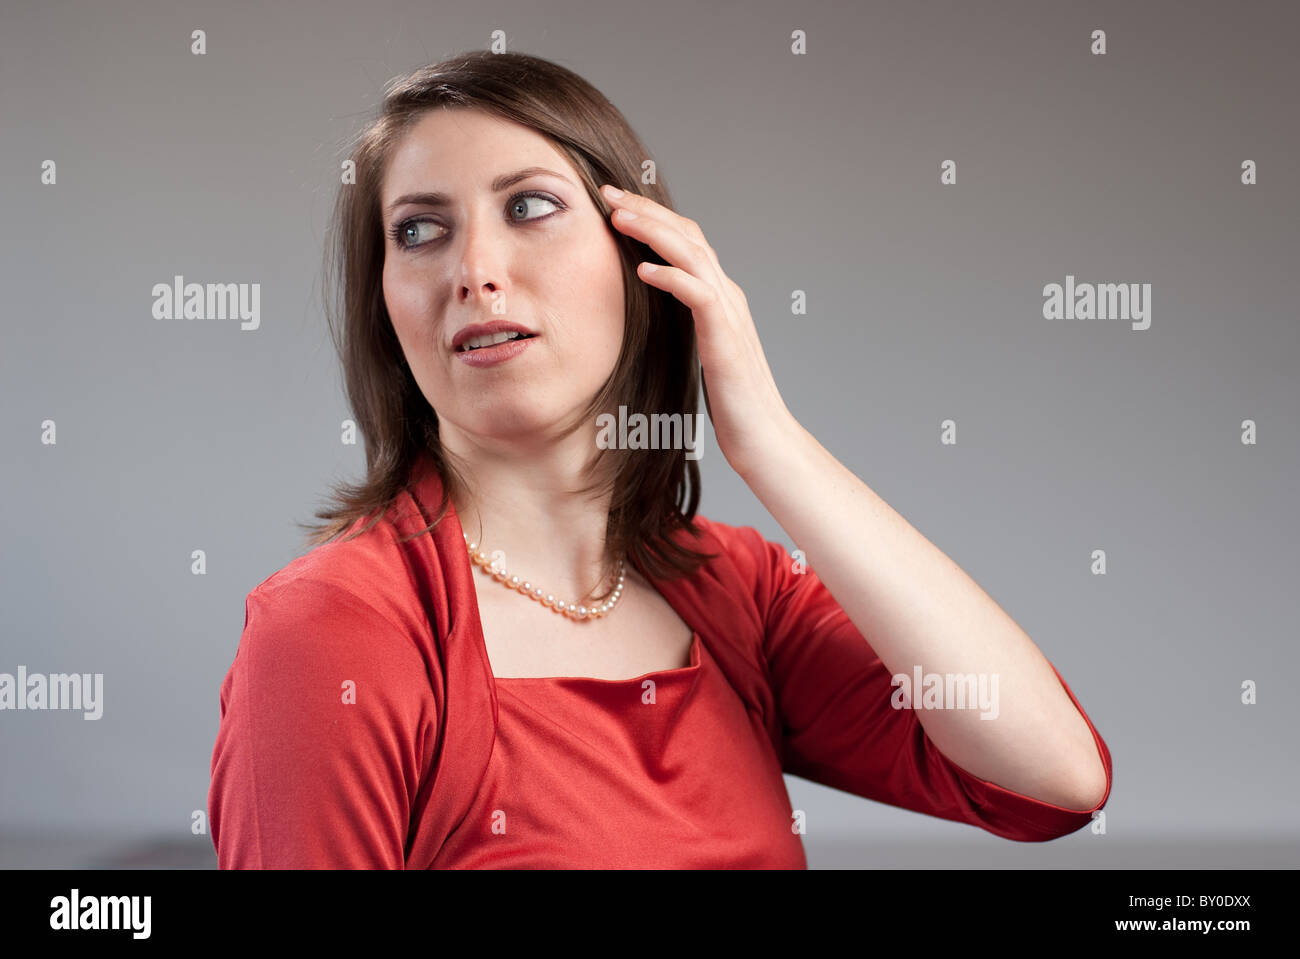 Portrait of a young pretty woman wearing a red top Stock Photo